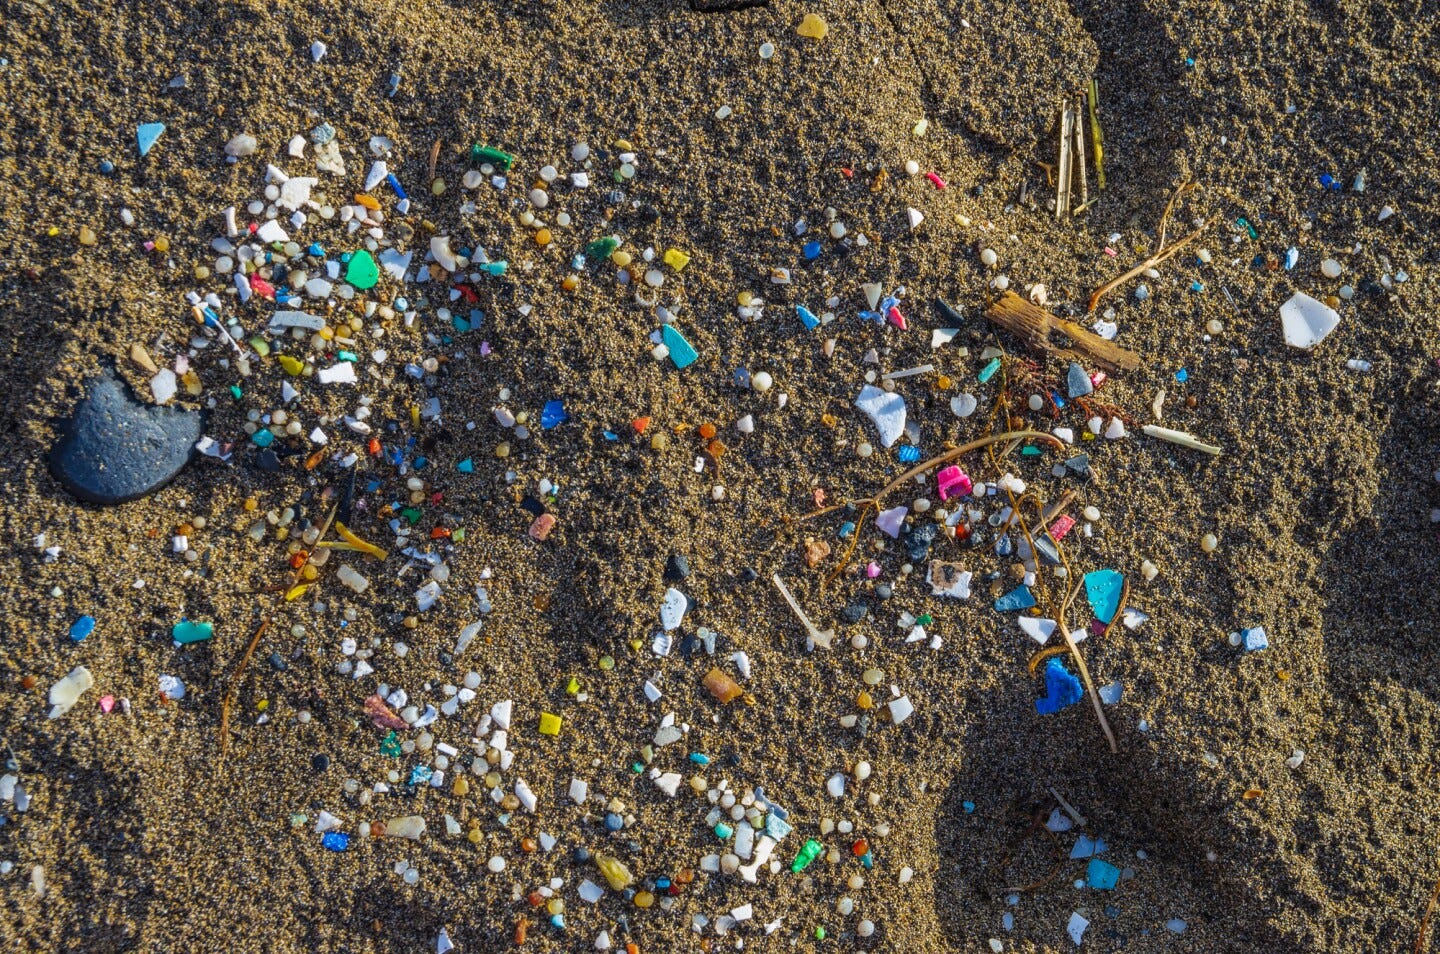 A new study has demonstrated that microplastics that wash out to sea can take dangeorus pathogens along for the ride